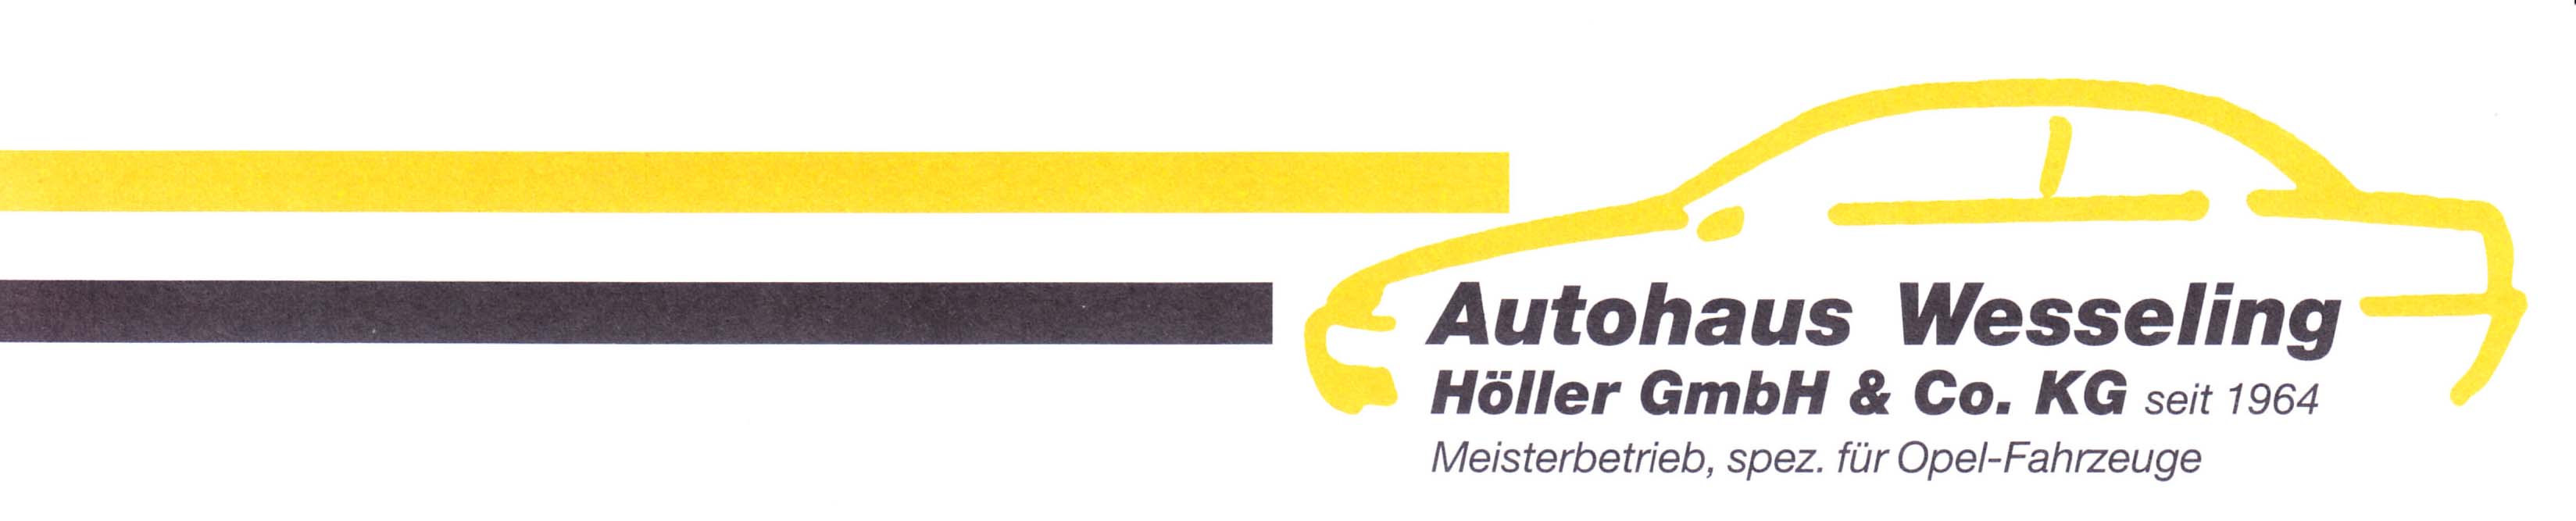 Autohaus Wesseling